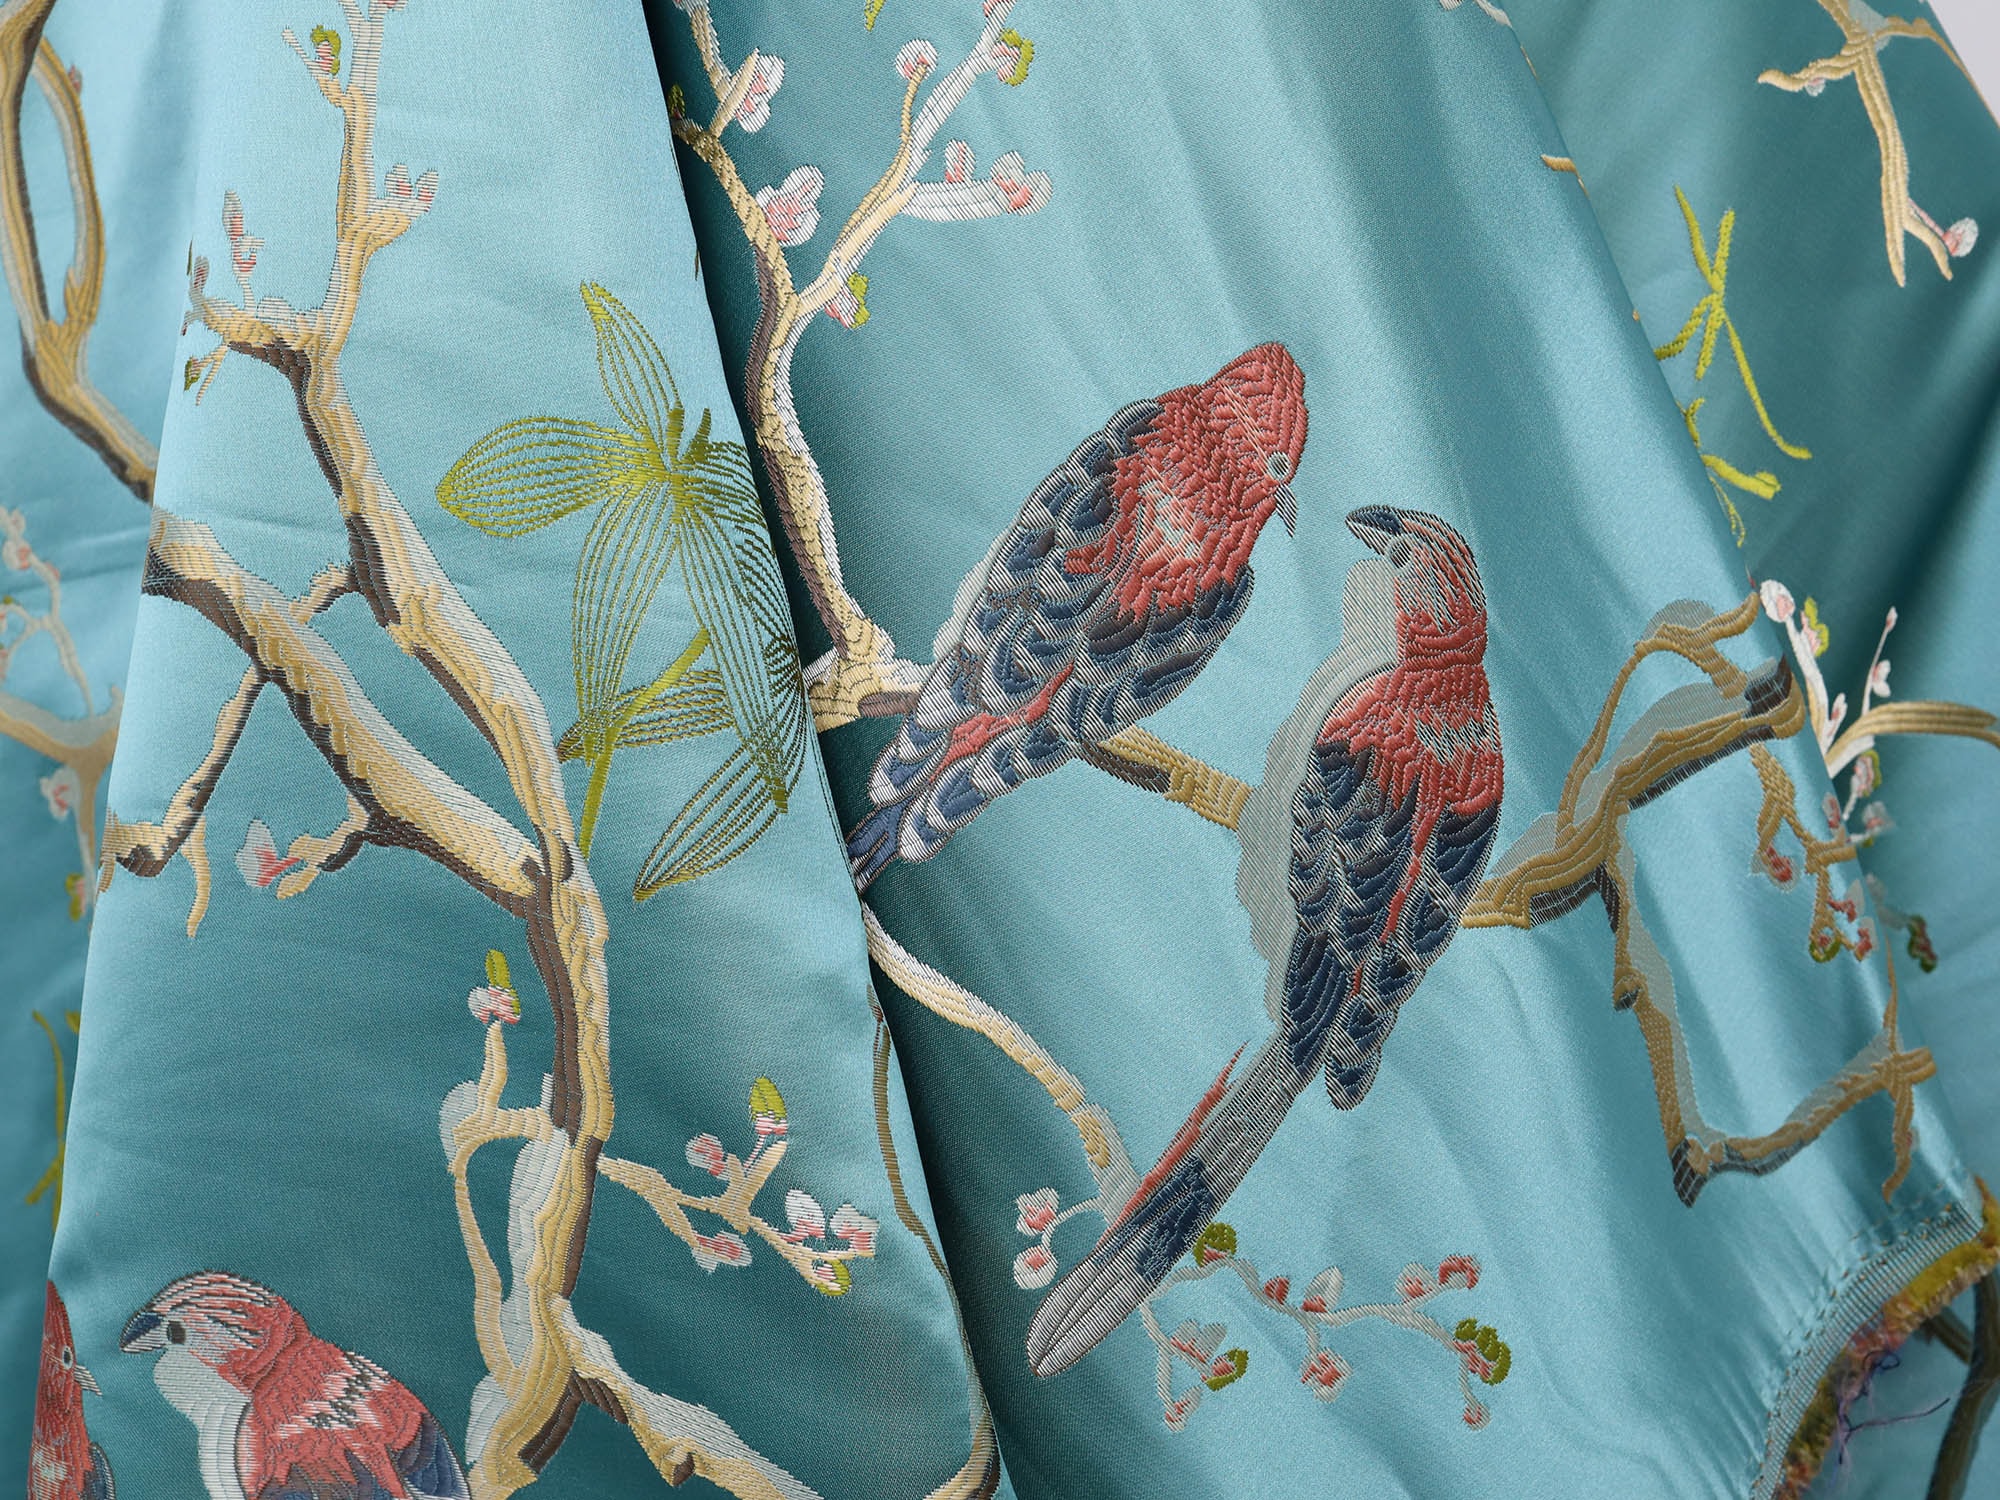 Birds Fabric by the Yard, Winged Animal and Butterflies on Thin Leafy  Branches with Berries, Decorative Upholstery Fabric for Chairs & Home  Accents